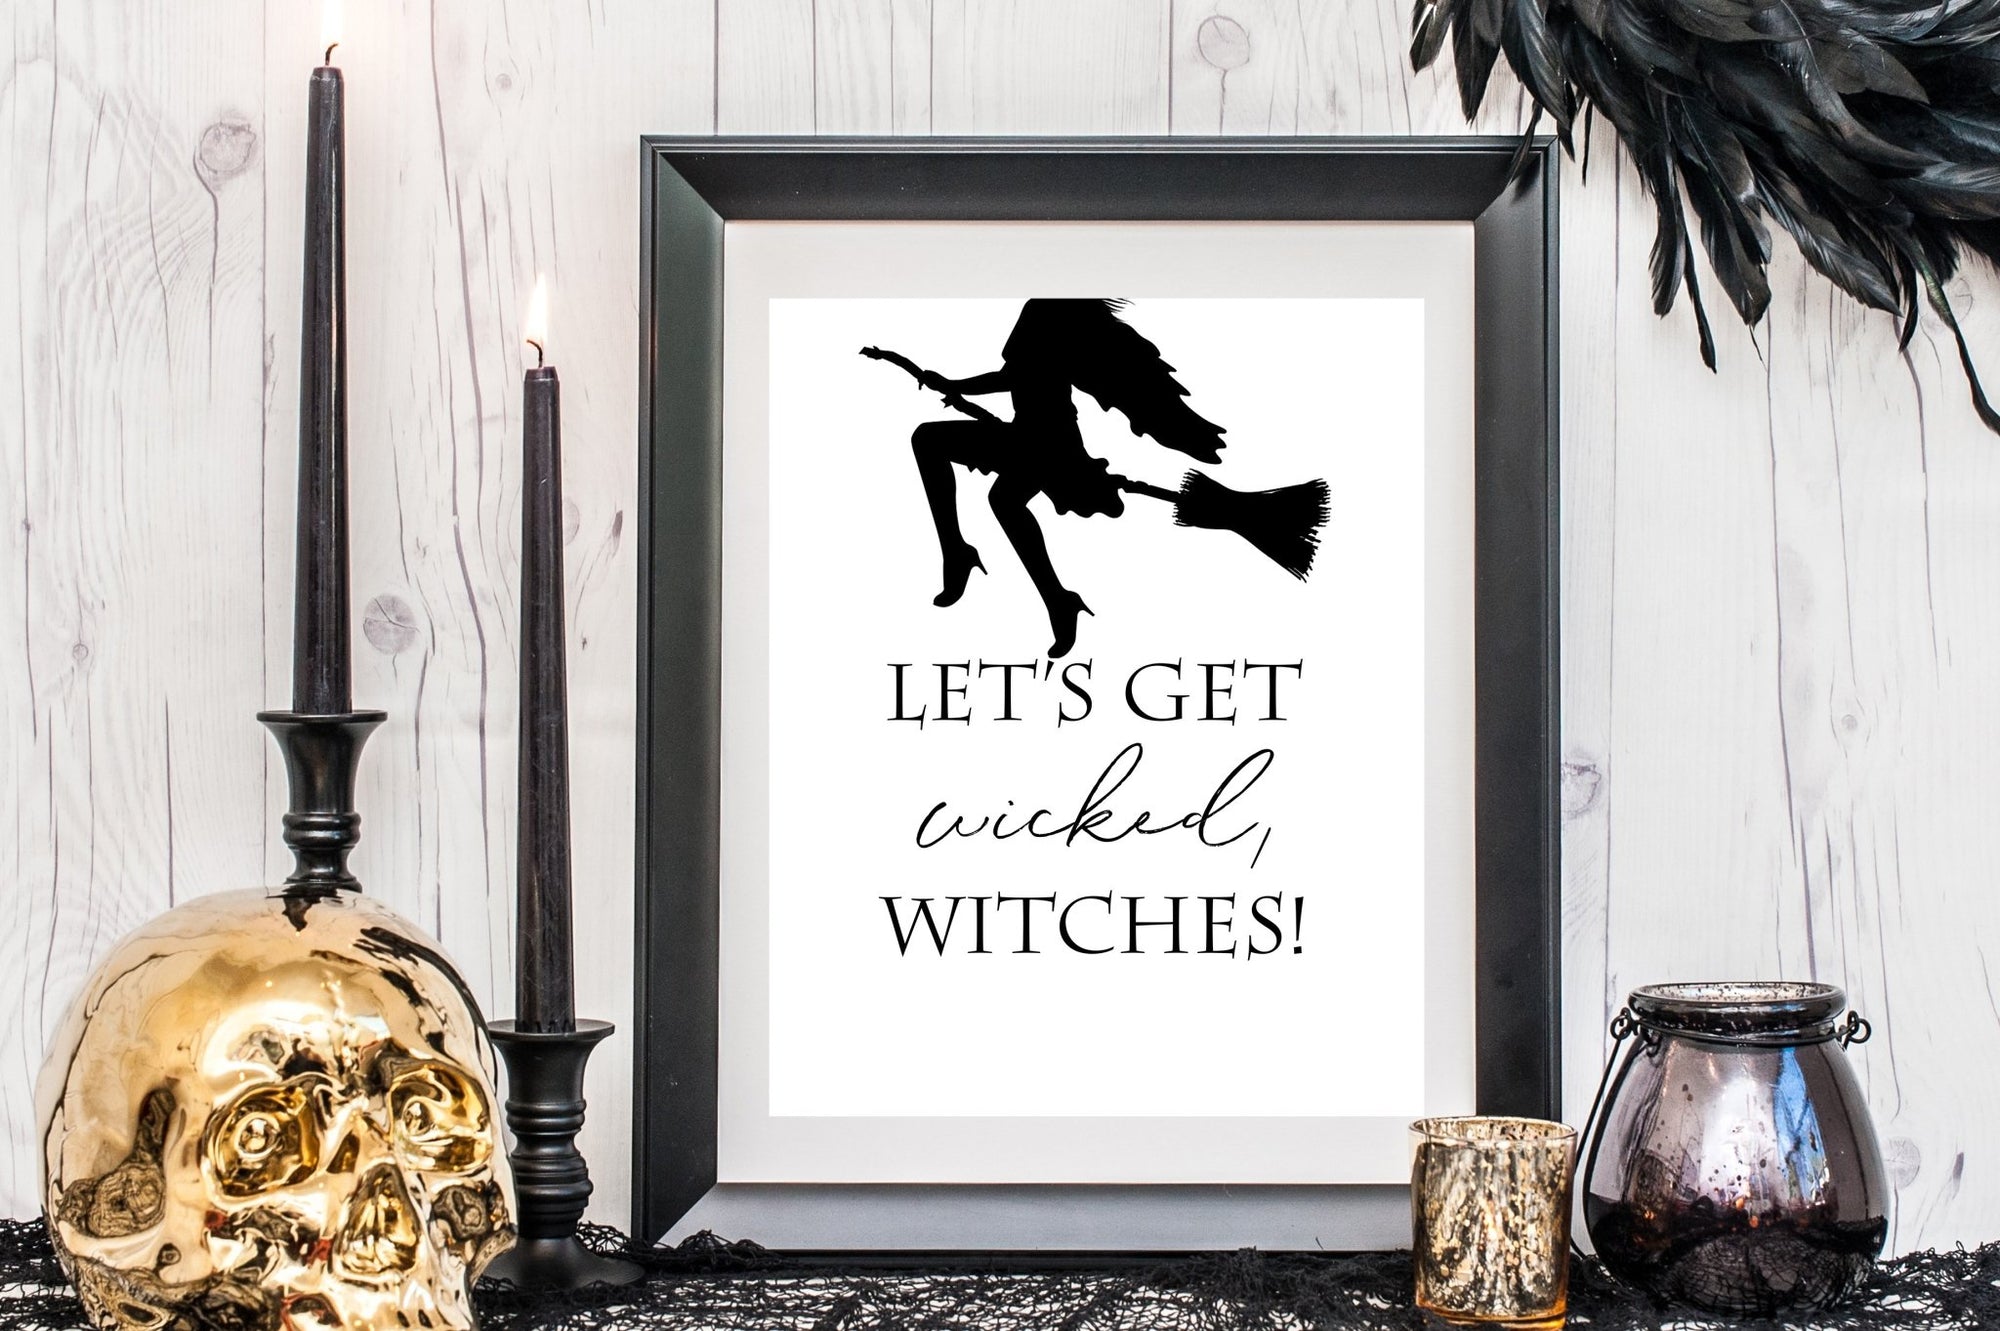 Let's Get Wicked, Witches Sign - FREE Printable - Pretty Collected